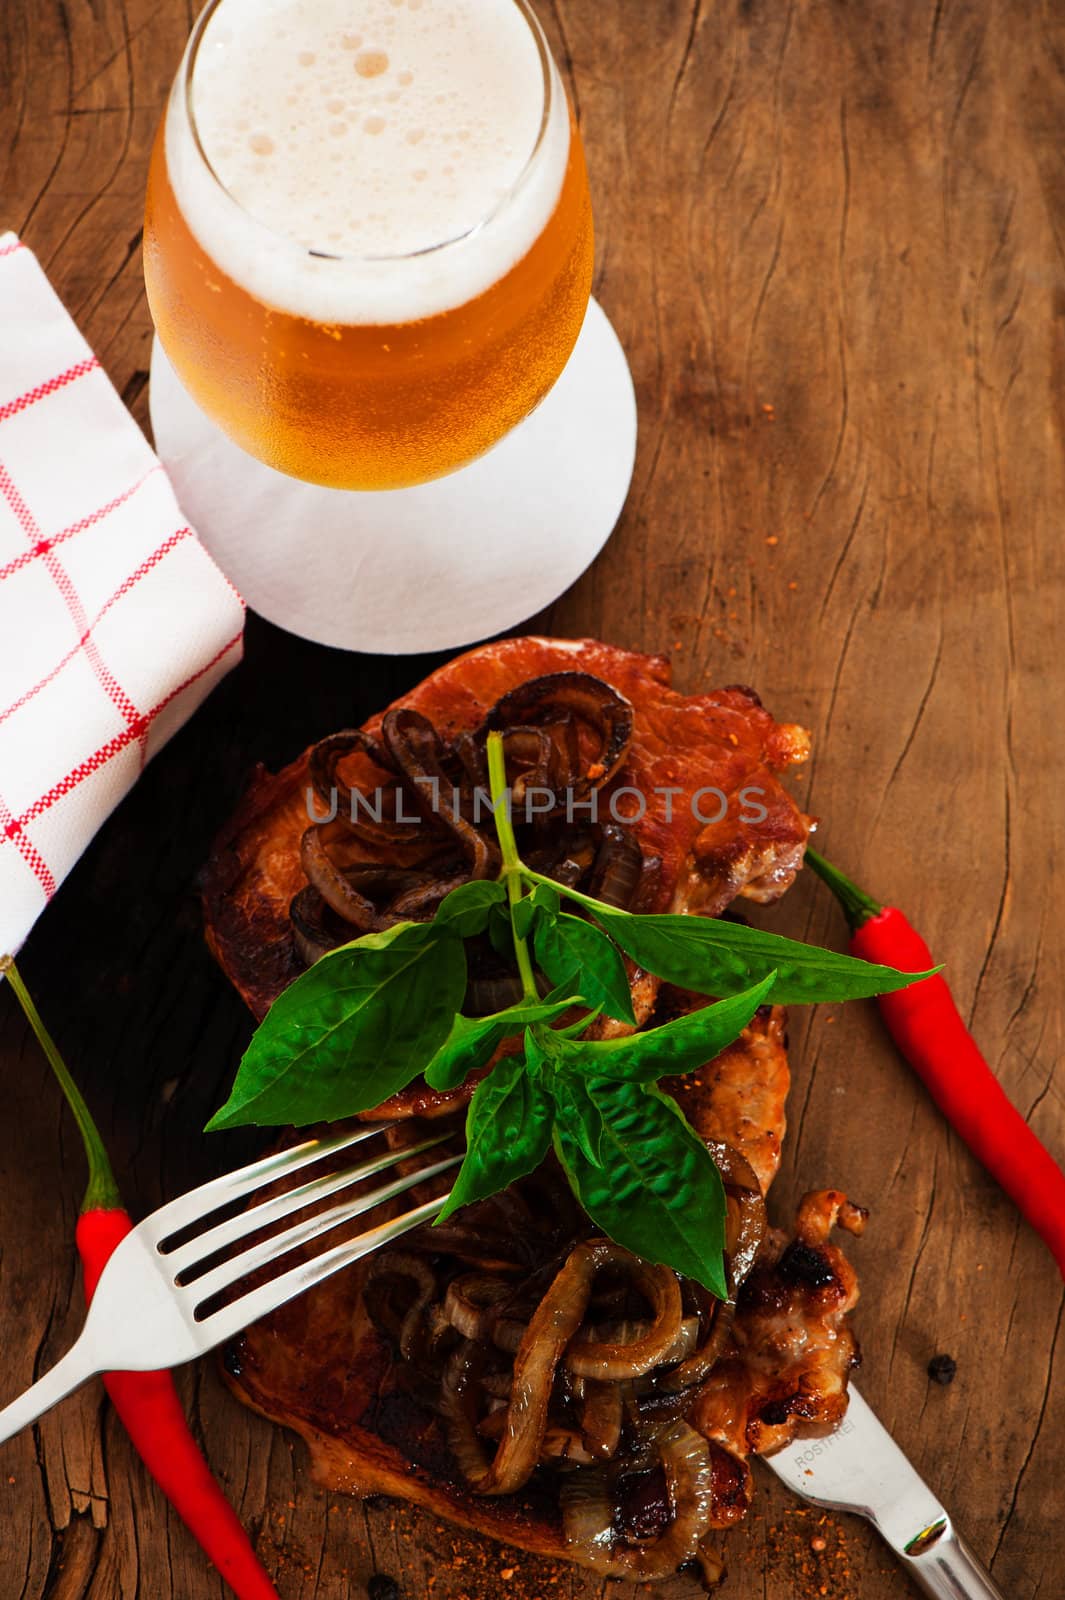 View of some pieces of spicy fried meat with onion on a wooden underground chili  pepper and beer as decoration